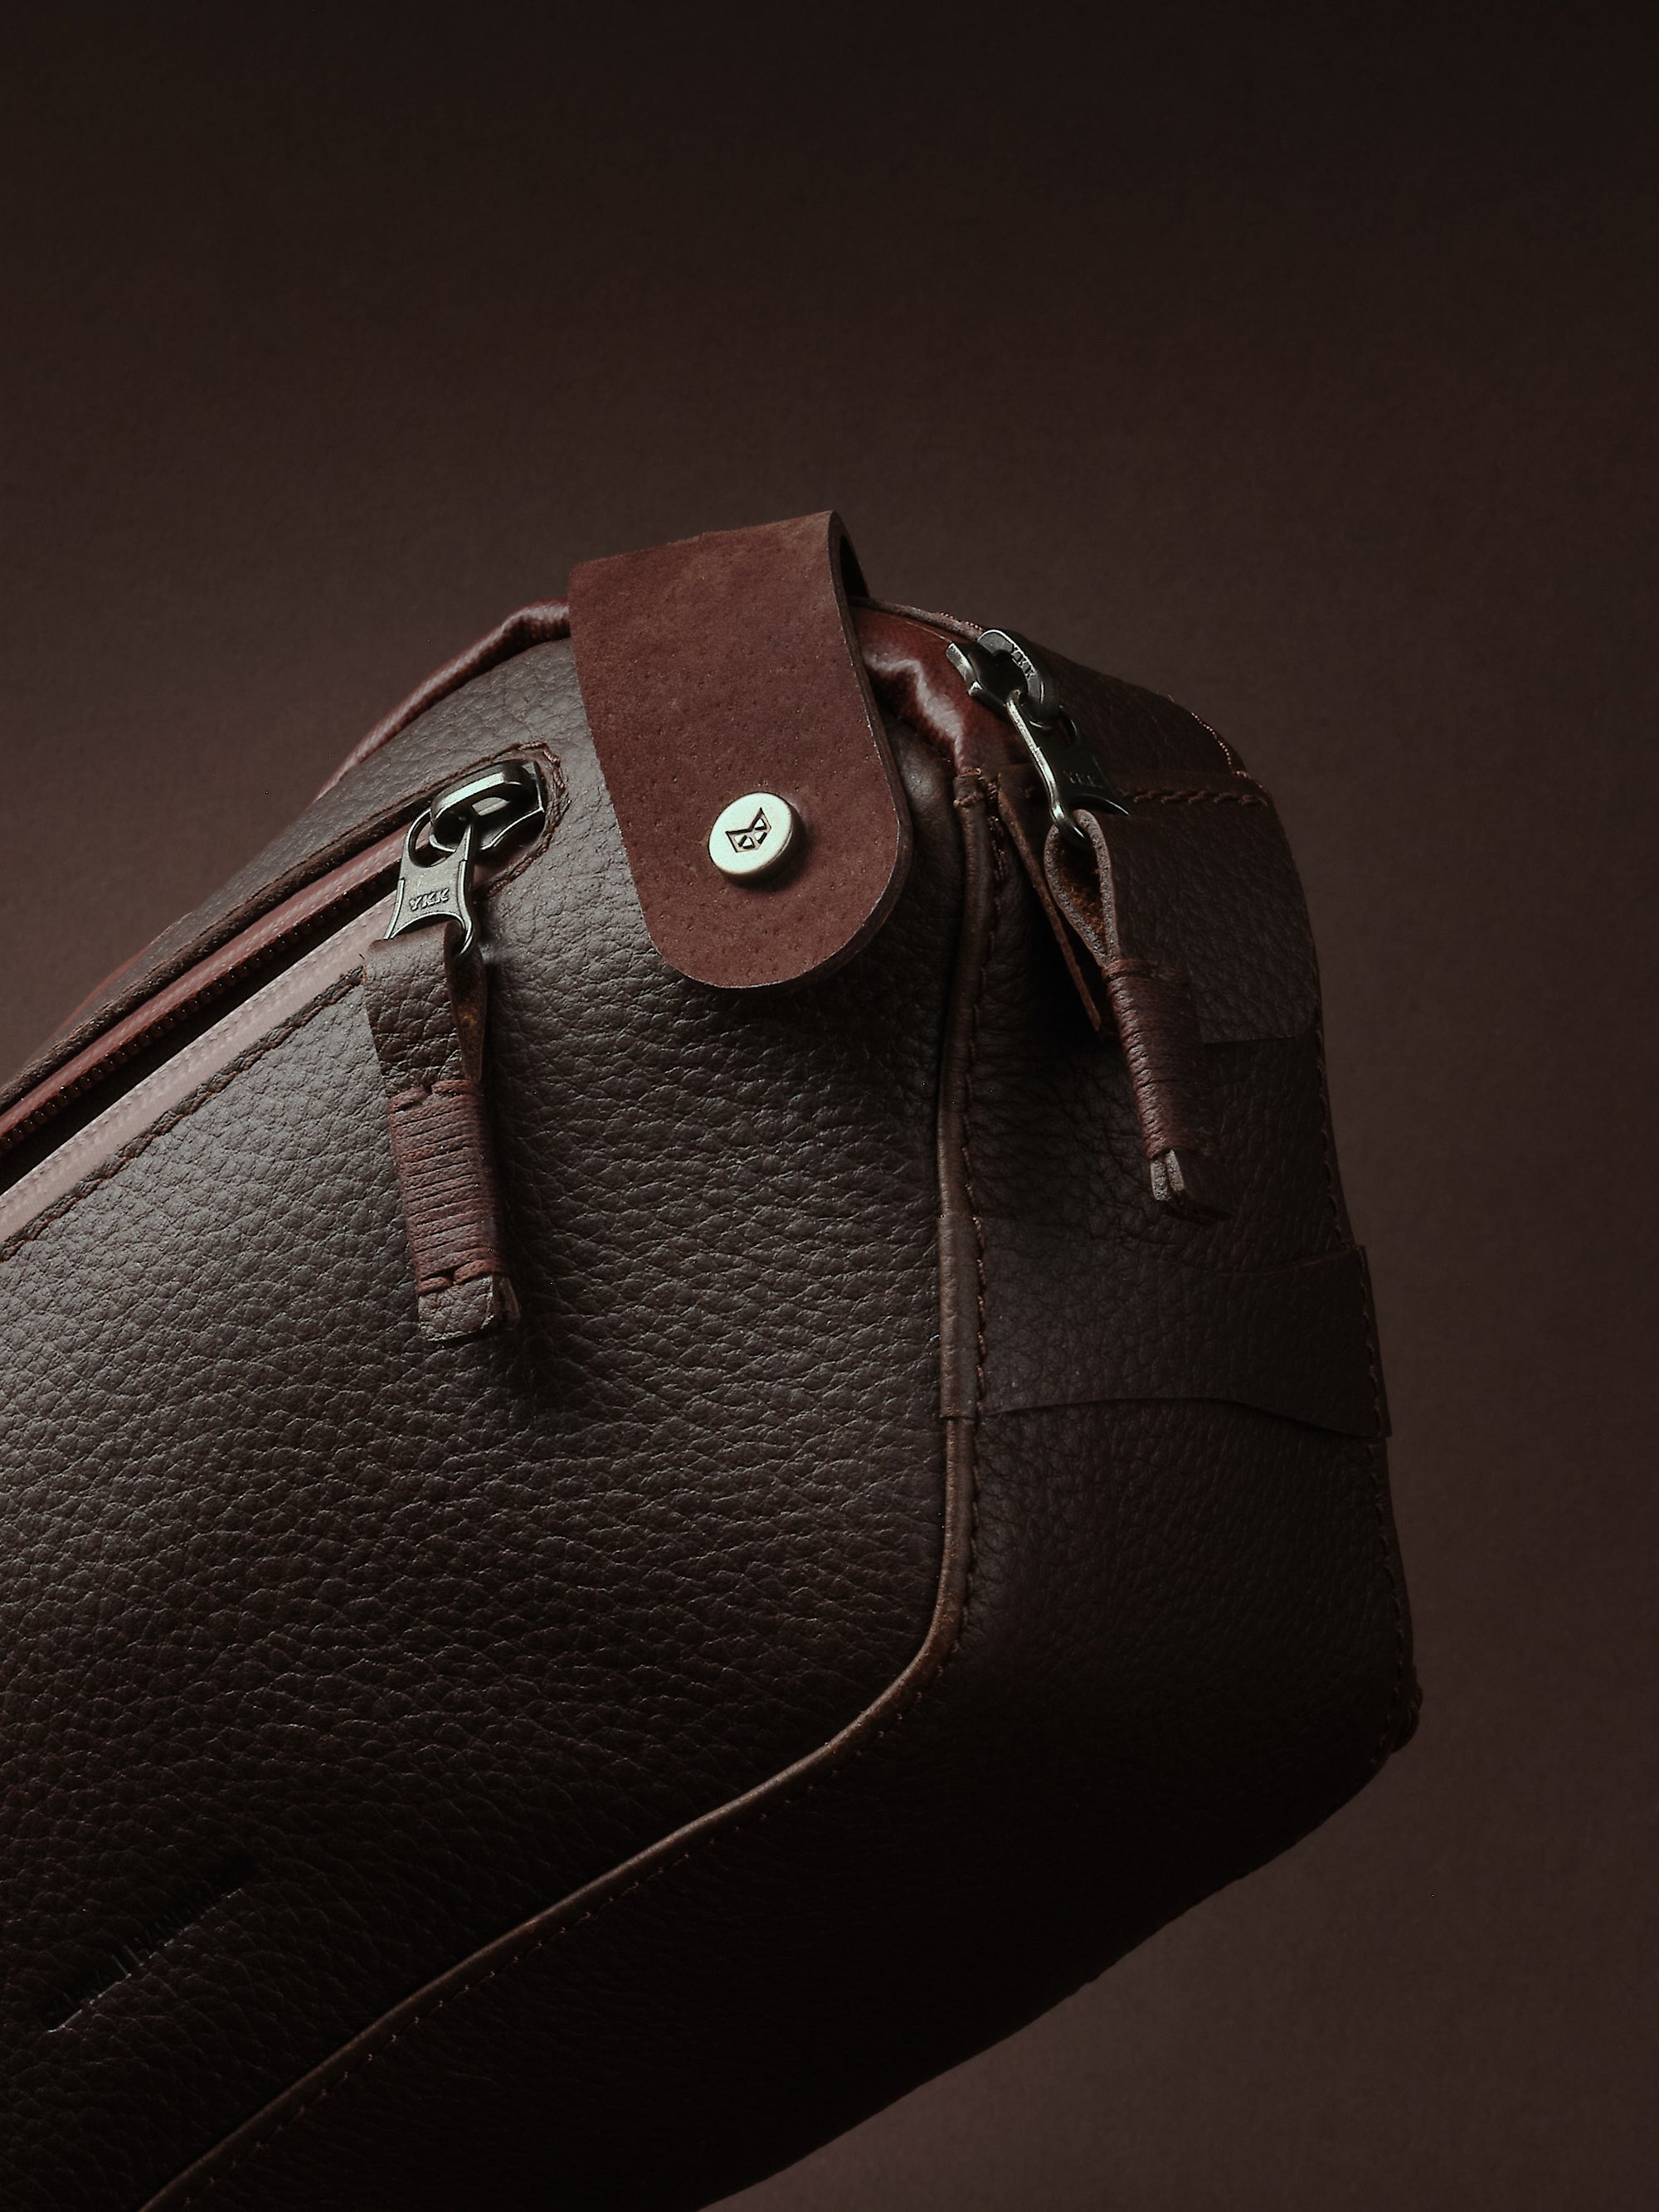 Hand-stitched pull tabs. Leather Sling Bag. Waist Pack Dark Brown by Capra